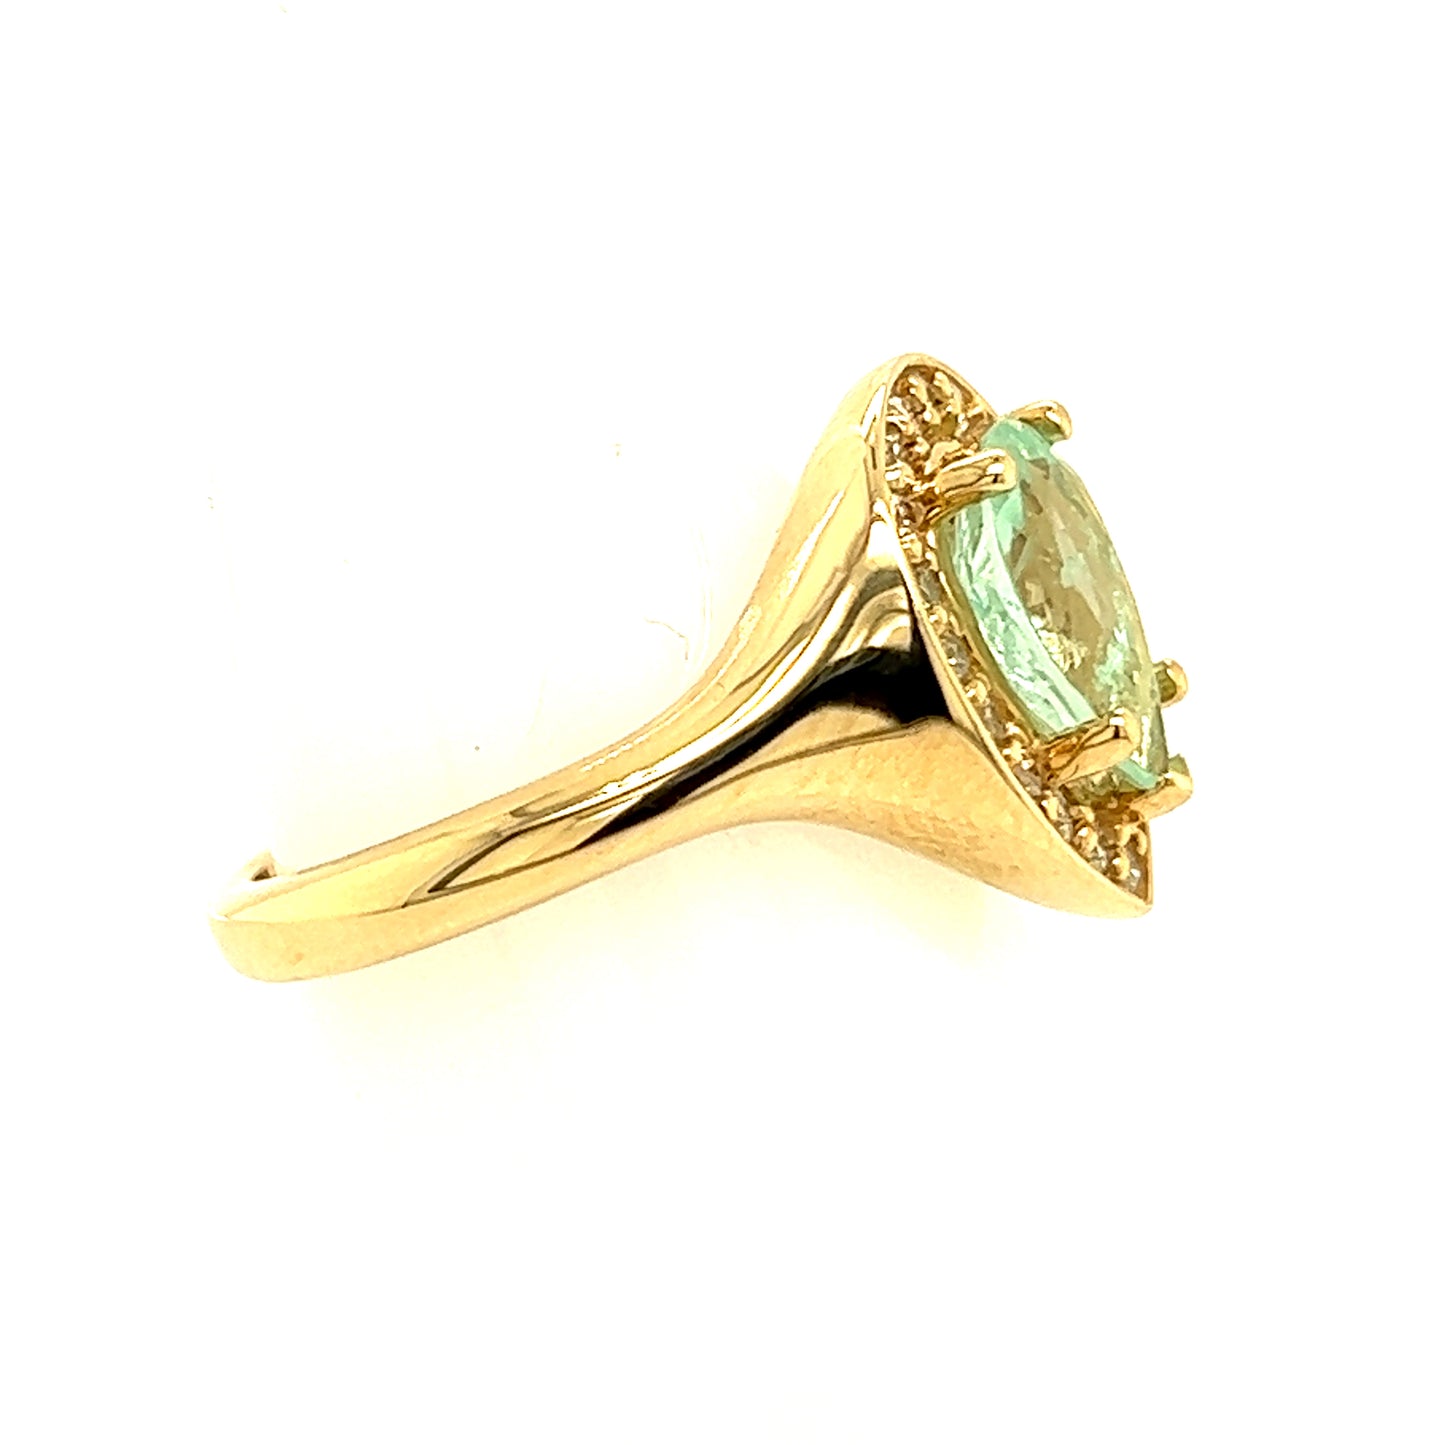 Natural Emerald Diamond Ring Size 6.5 14k Y Gold 1.74 TCW Certified $4,950 216677 - Certified Fine Jewelry